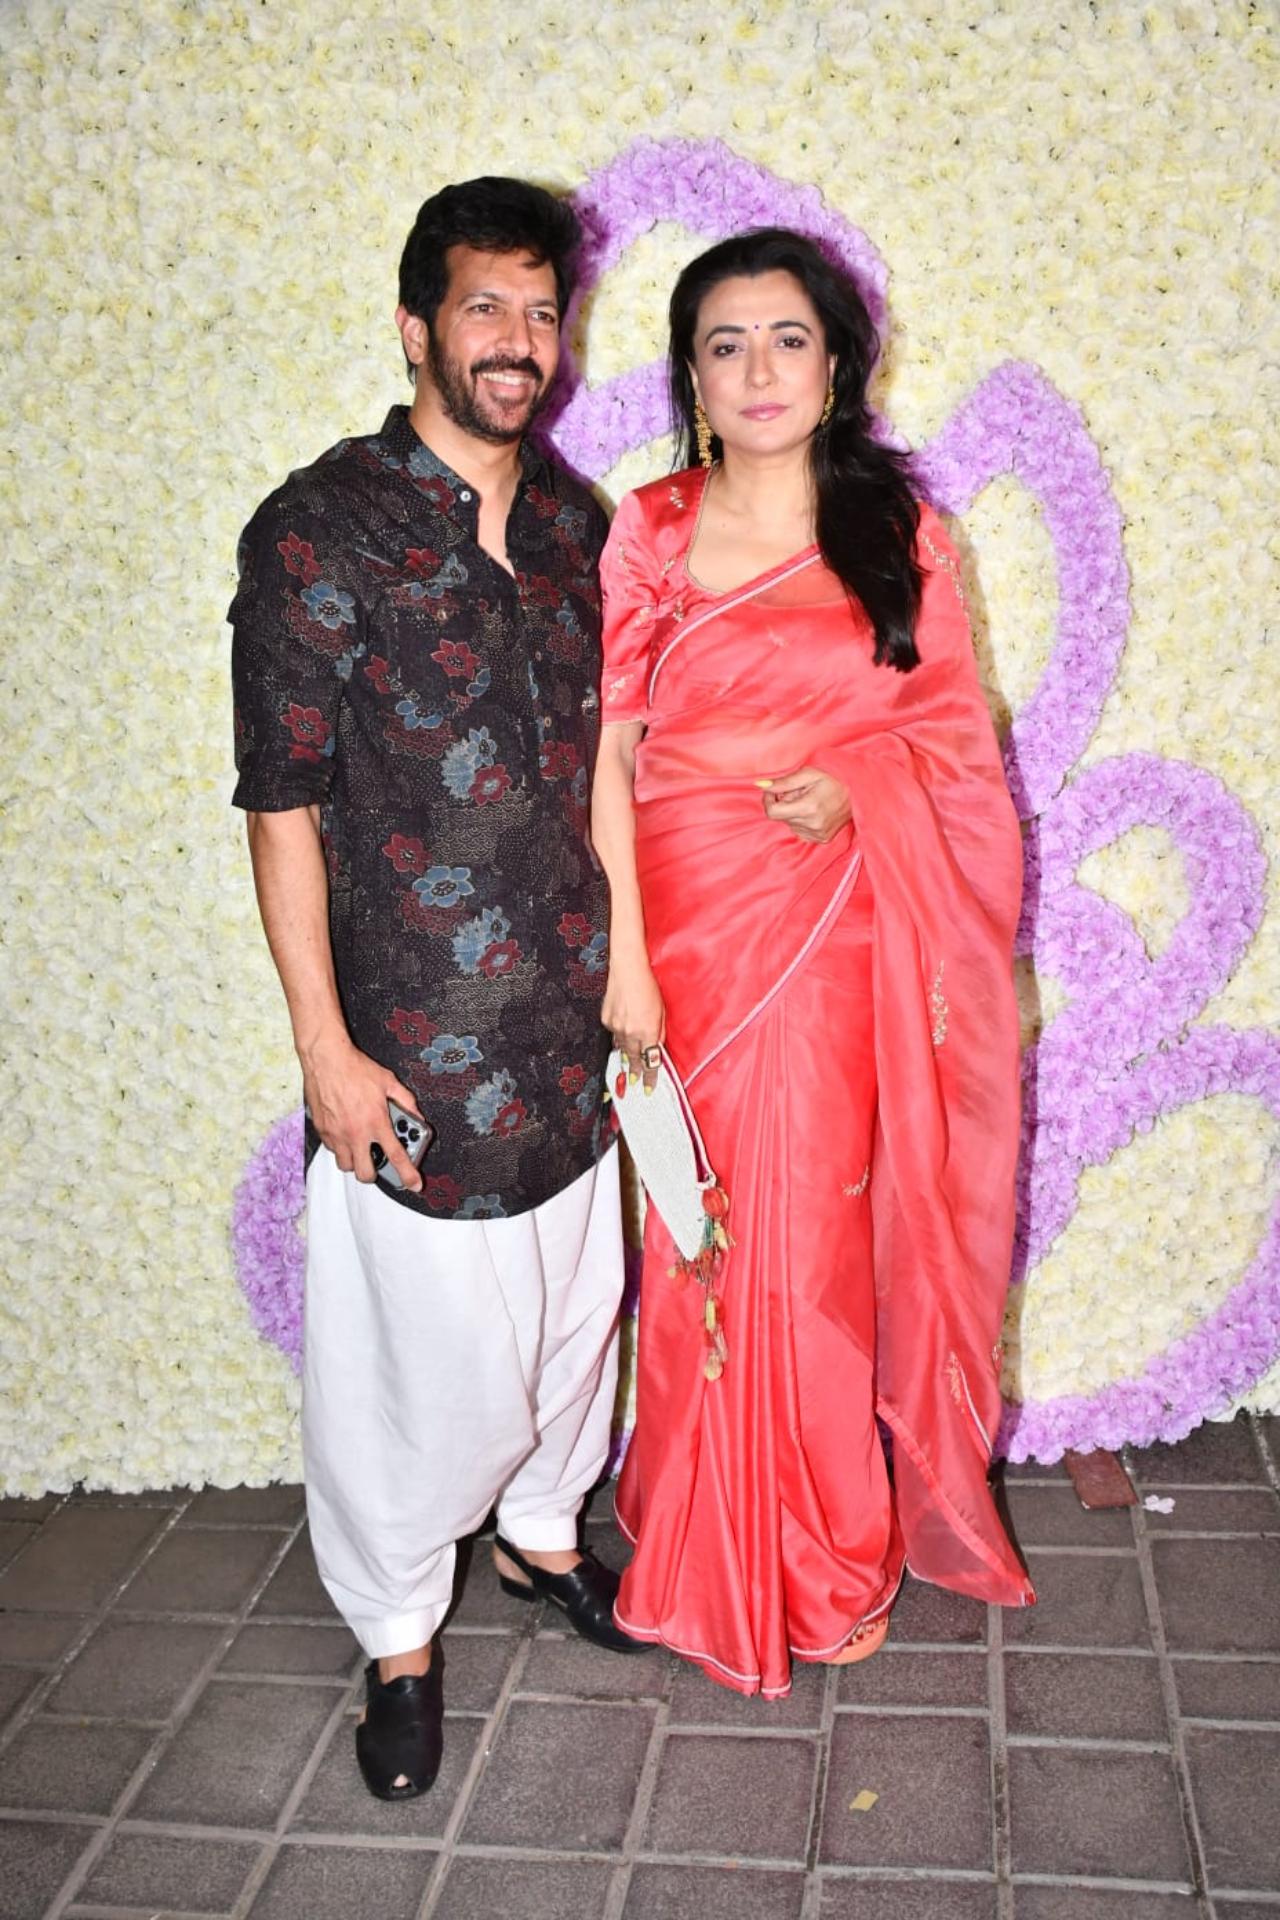 Filmmaker Kabir Khan along with his wife Mini Mathur was also snapped as they arrived for the Ganpati darshan